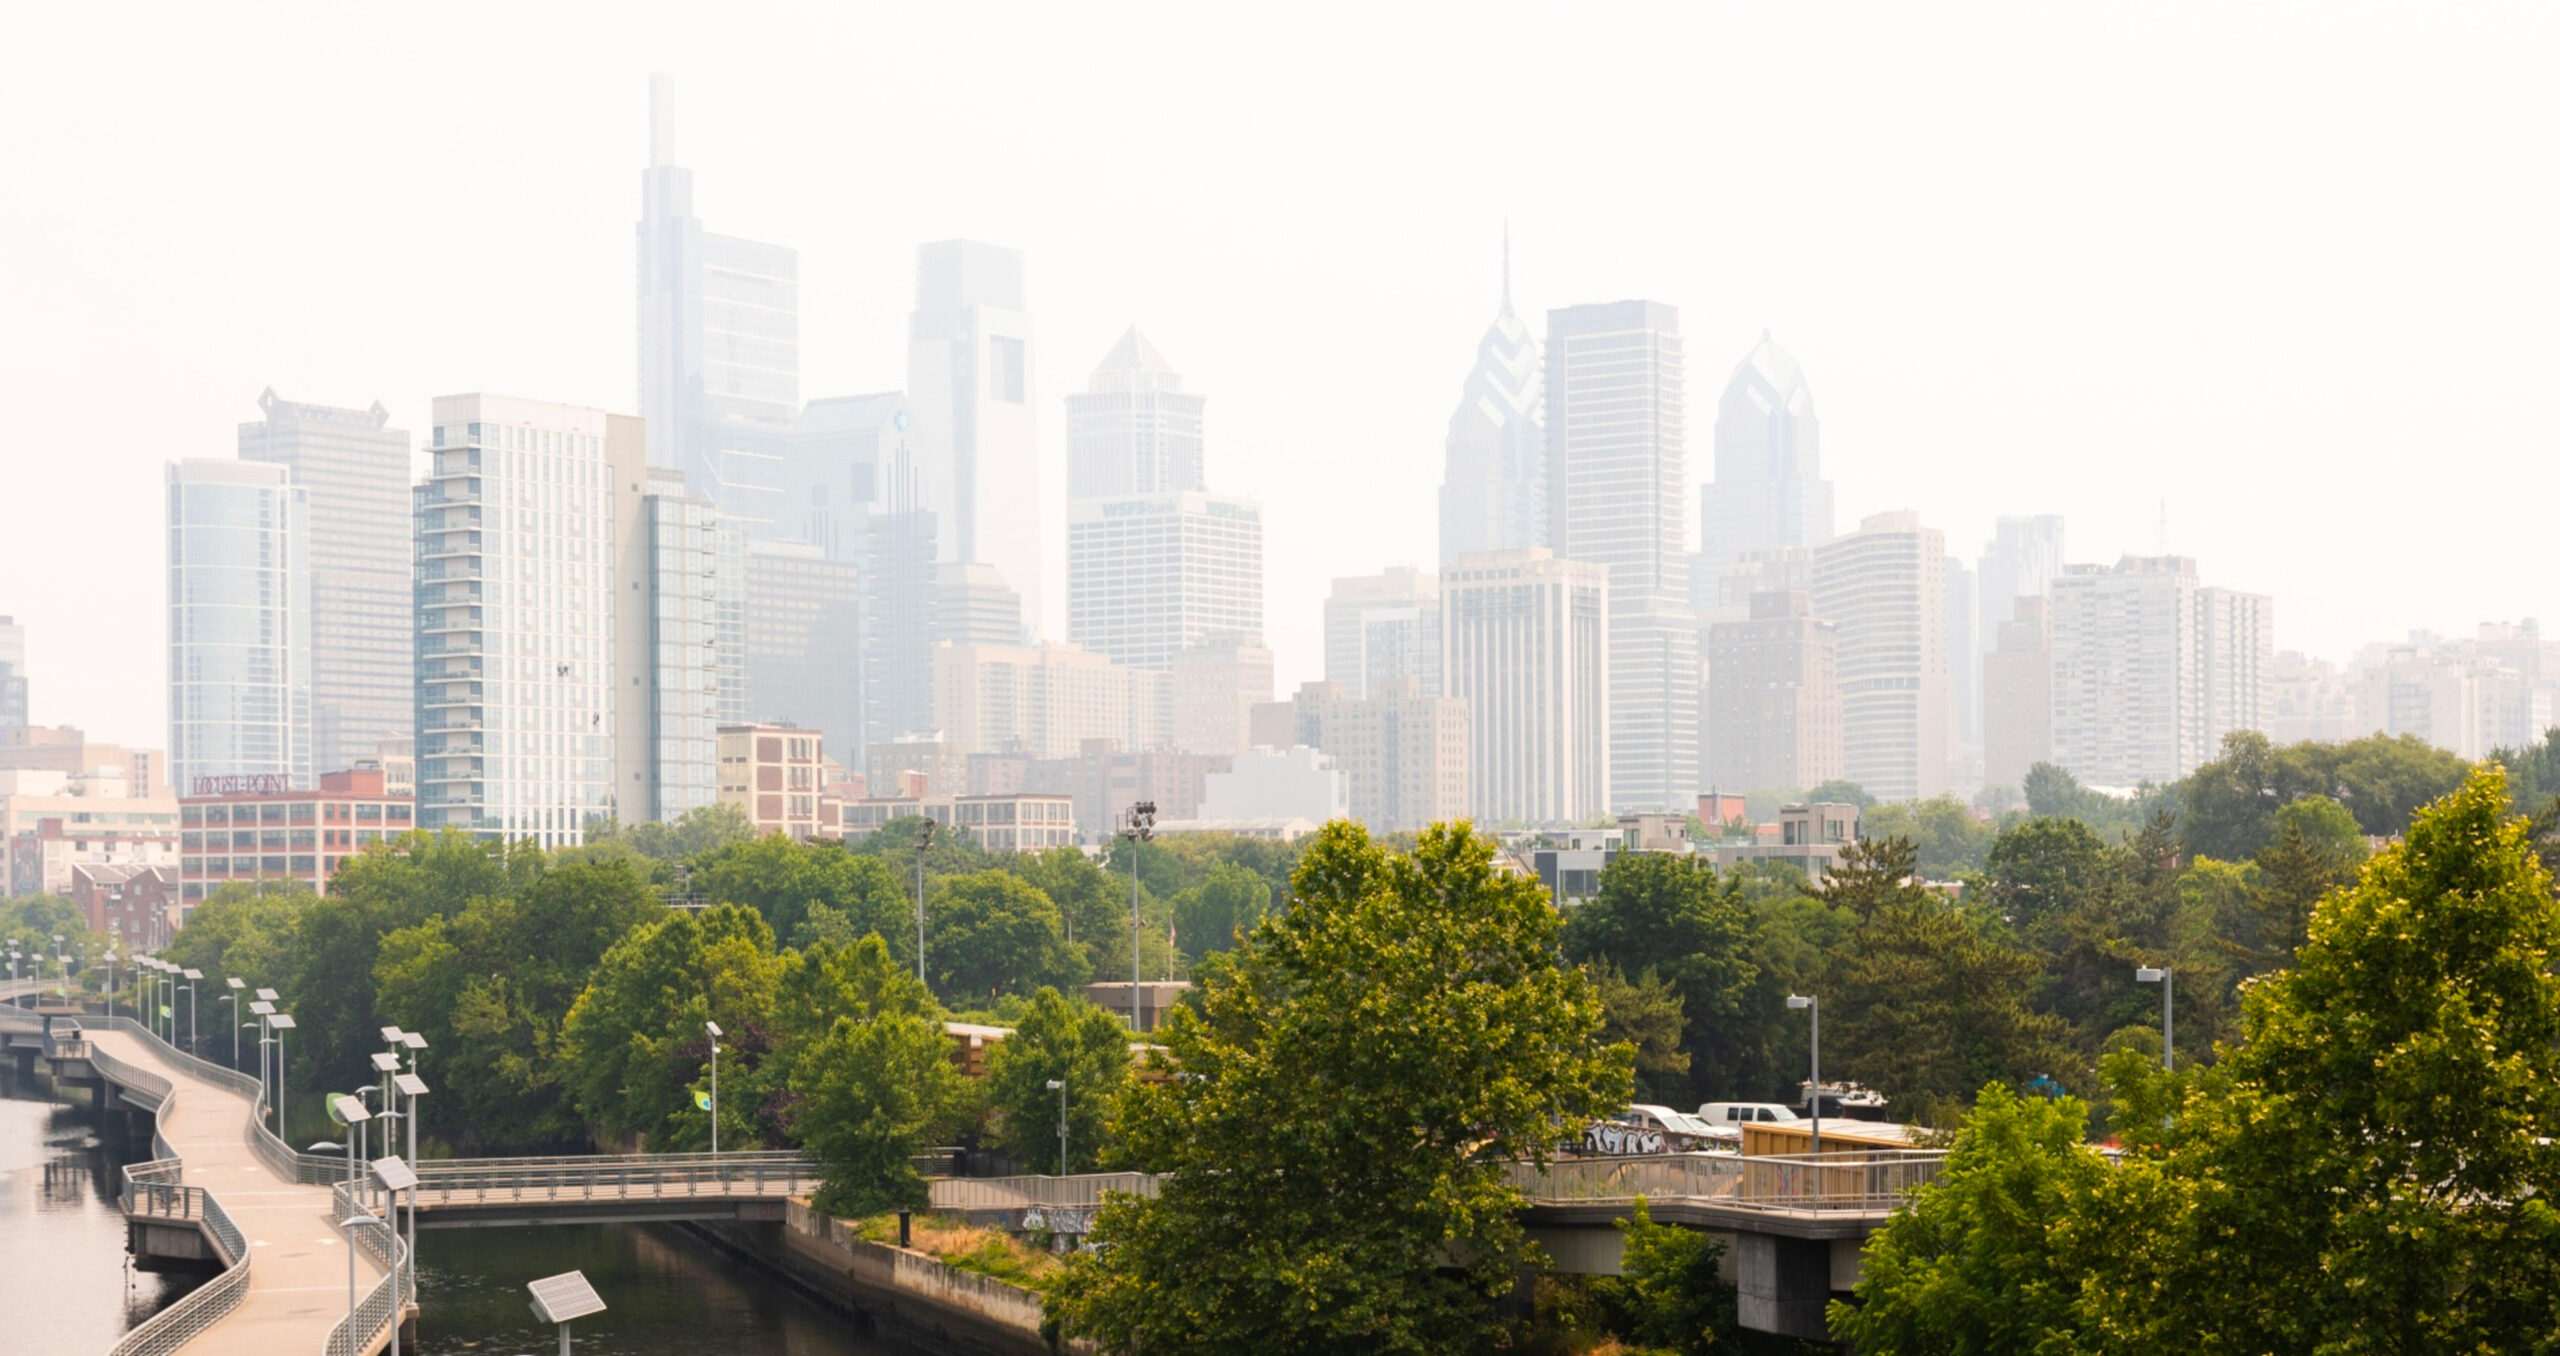 Philadelphia, one of the US cities engulfed by smoke from Canadian wildfires in June. Stegeman wonders how US politicians and bankers could see it and yet not question the physical risks of investment decisions (Photo: Hannah Beier/Bloomberg) 